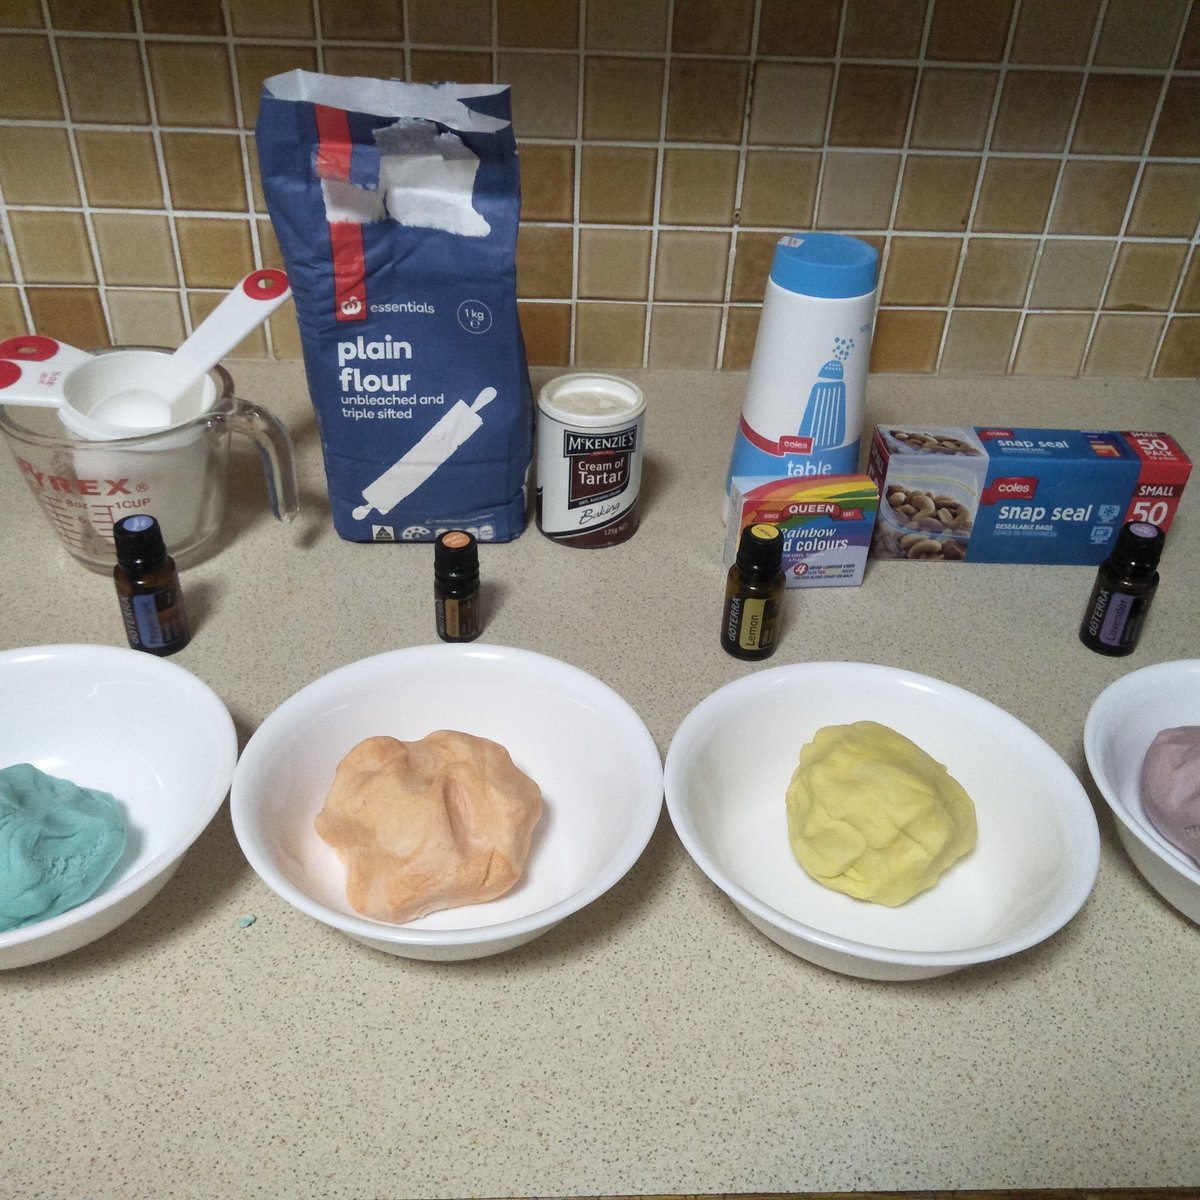 Experimenting with essential oils and playdough. Great physical therapy to help strengthen hands and release stress. 
#trishnash  #empowered  #author #howtouseessentialoils #playdough #peppermint 
#lavender #lemon #essentialoils  #doterra  #wildorange #dyi  #kidsactivities